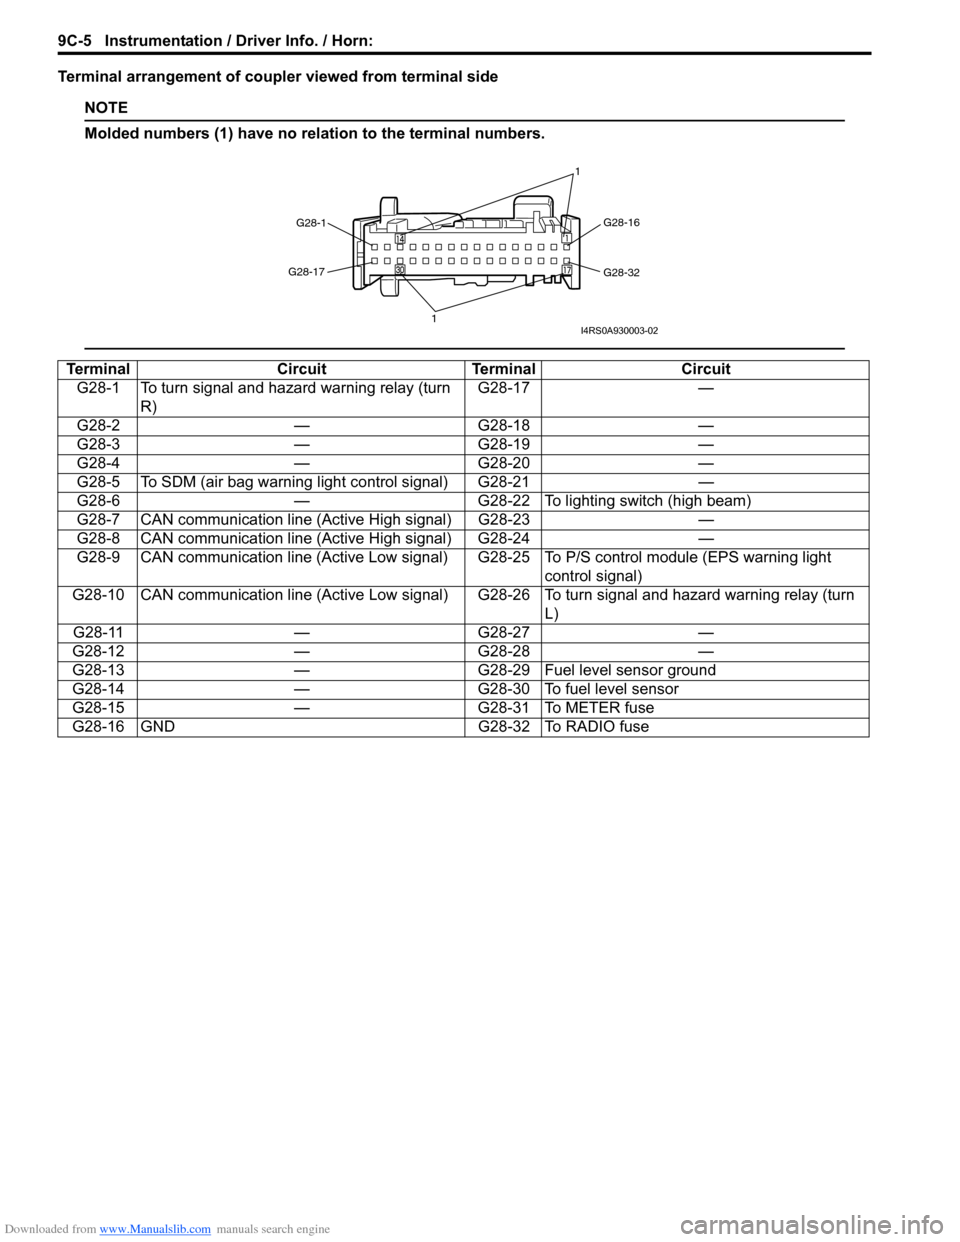 SUZUKI SWIFT 2007 2.G Service Workshop Manual Downloaded from www.Manualslib.com manuals search engine 9C-5 Instrumentation / Driver Info. / Horn: 
Terminal arrangement of coupler viewed from terminal side
NOTE
Molded numbers (1) have no relation